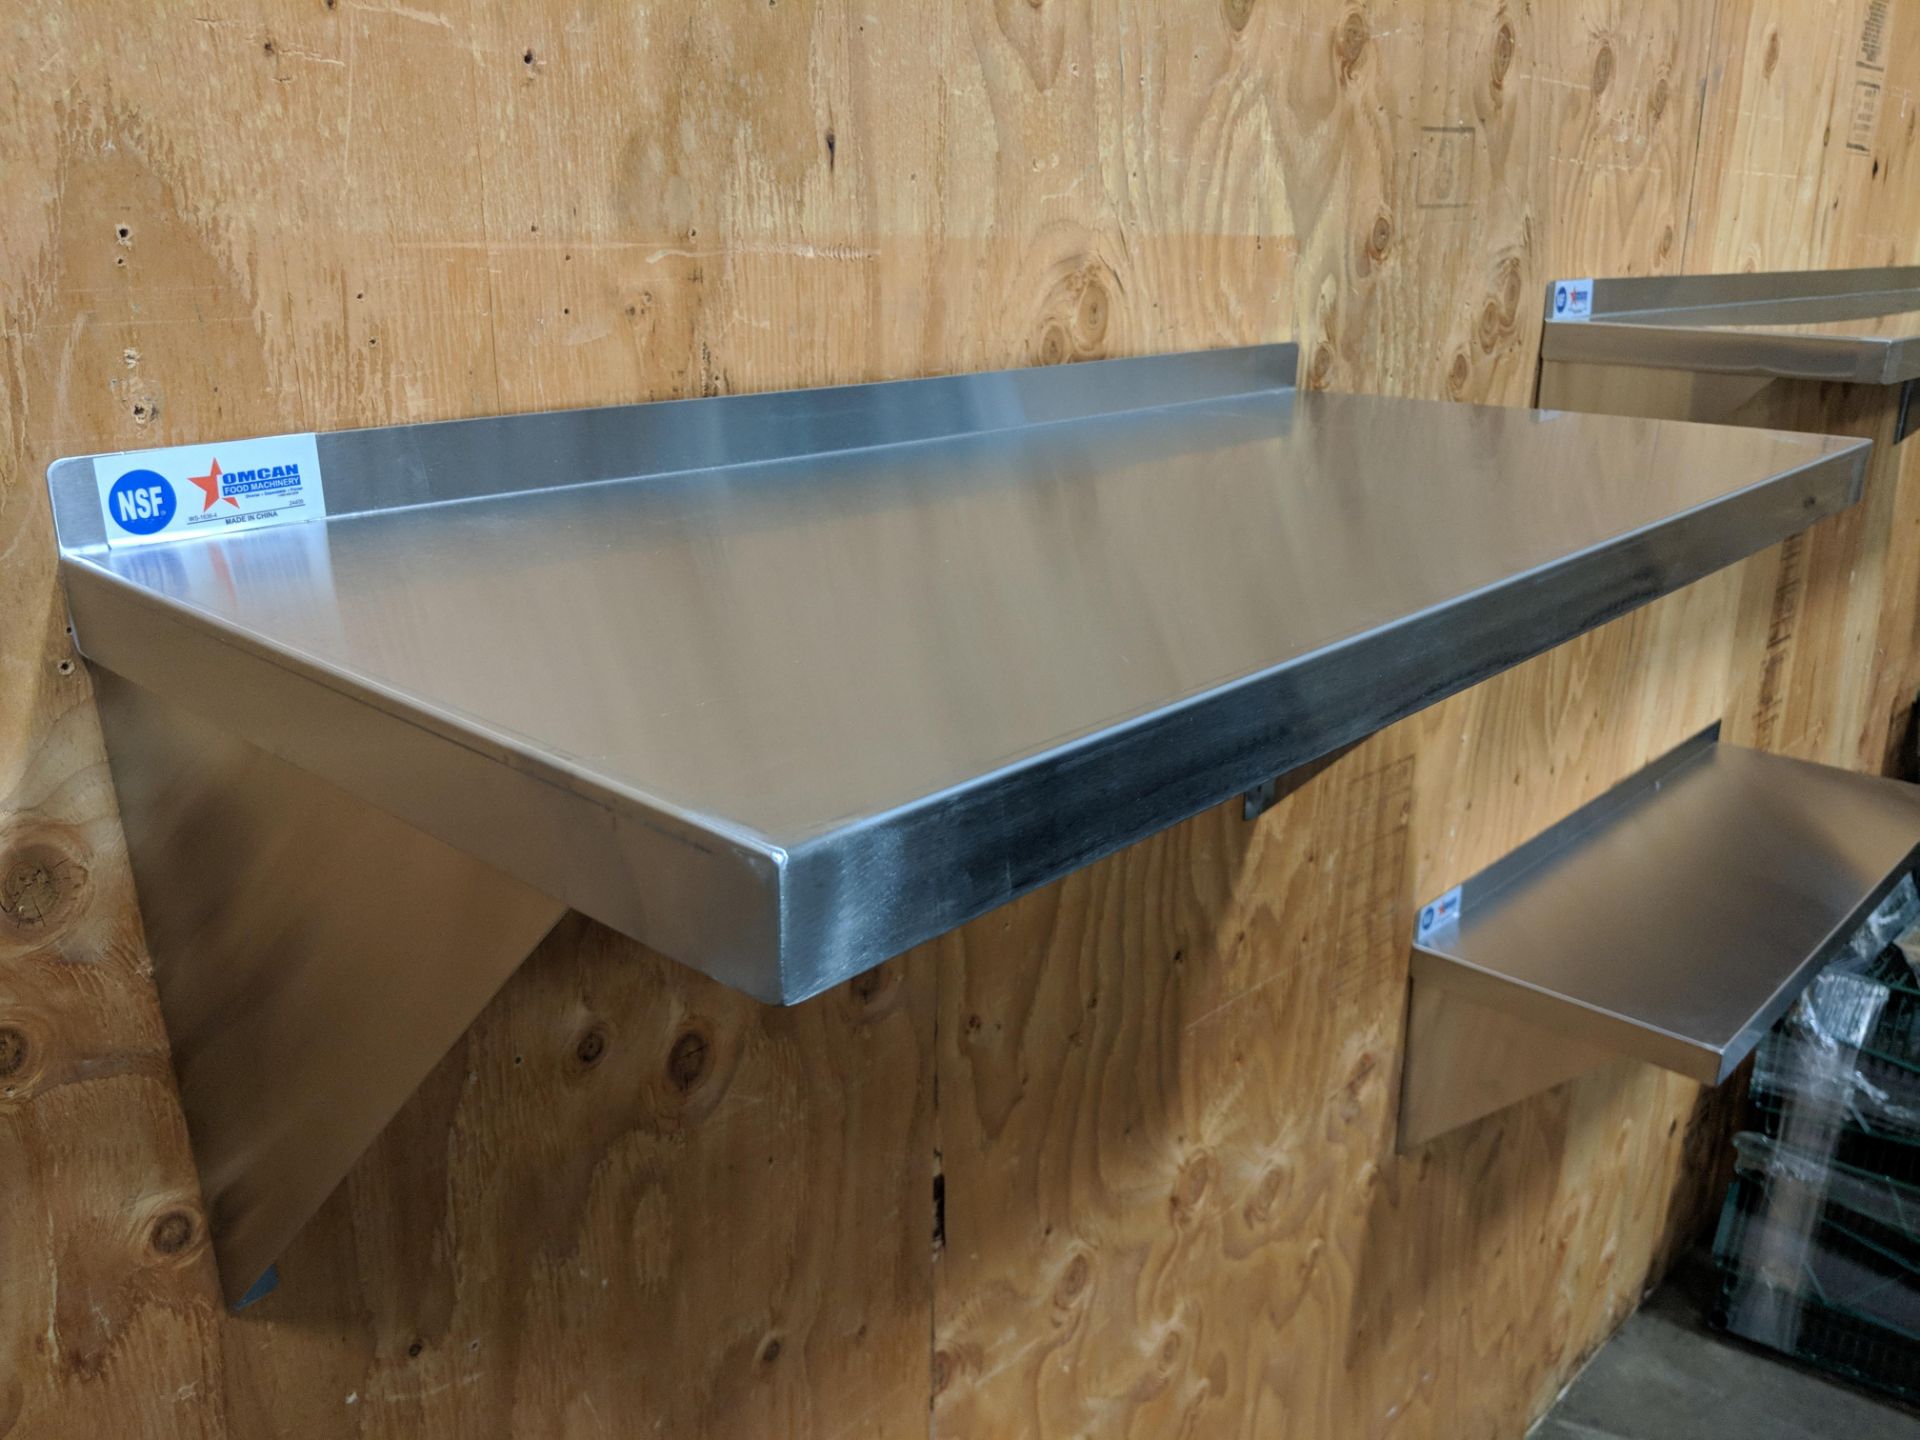 16" x 48" Stainless Steel Wall Shelves, Omcan 24410 - Lot of 2 - Image 3 of 3